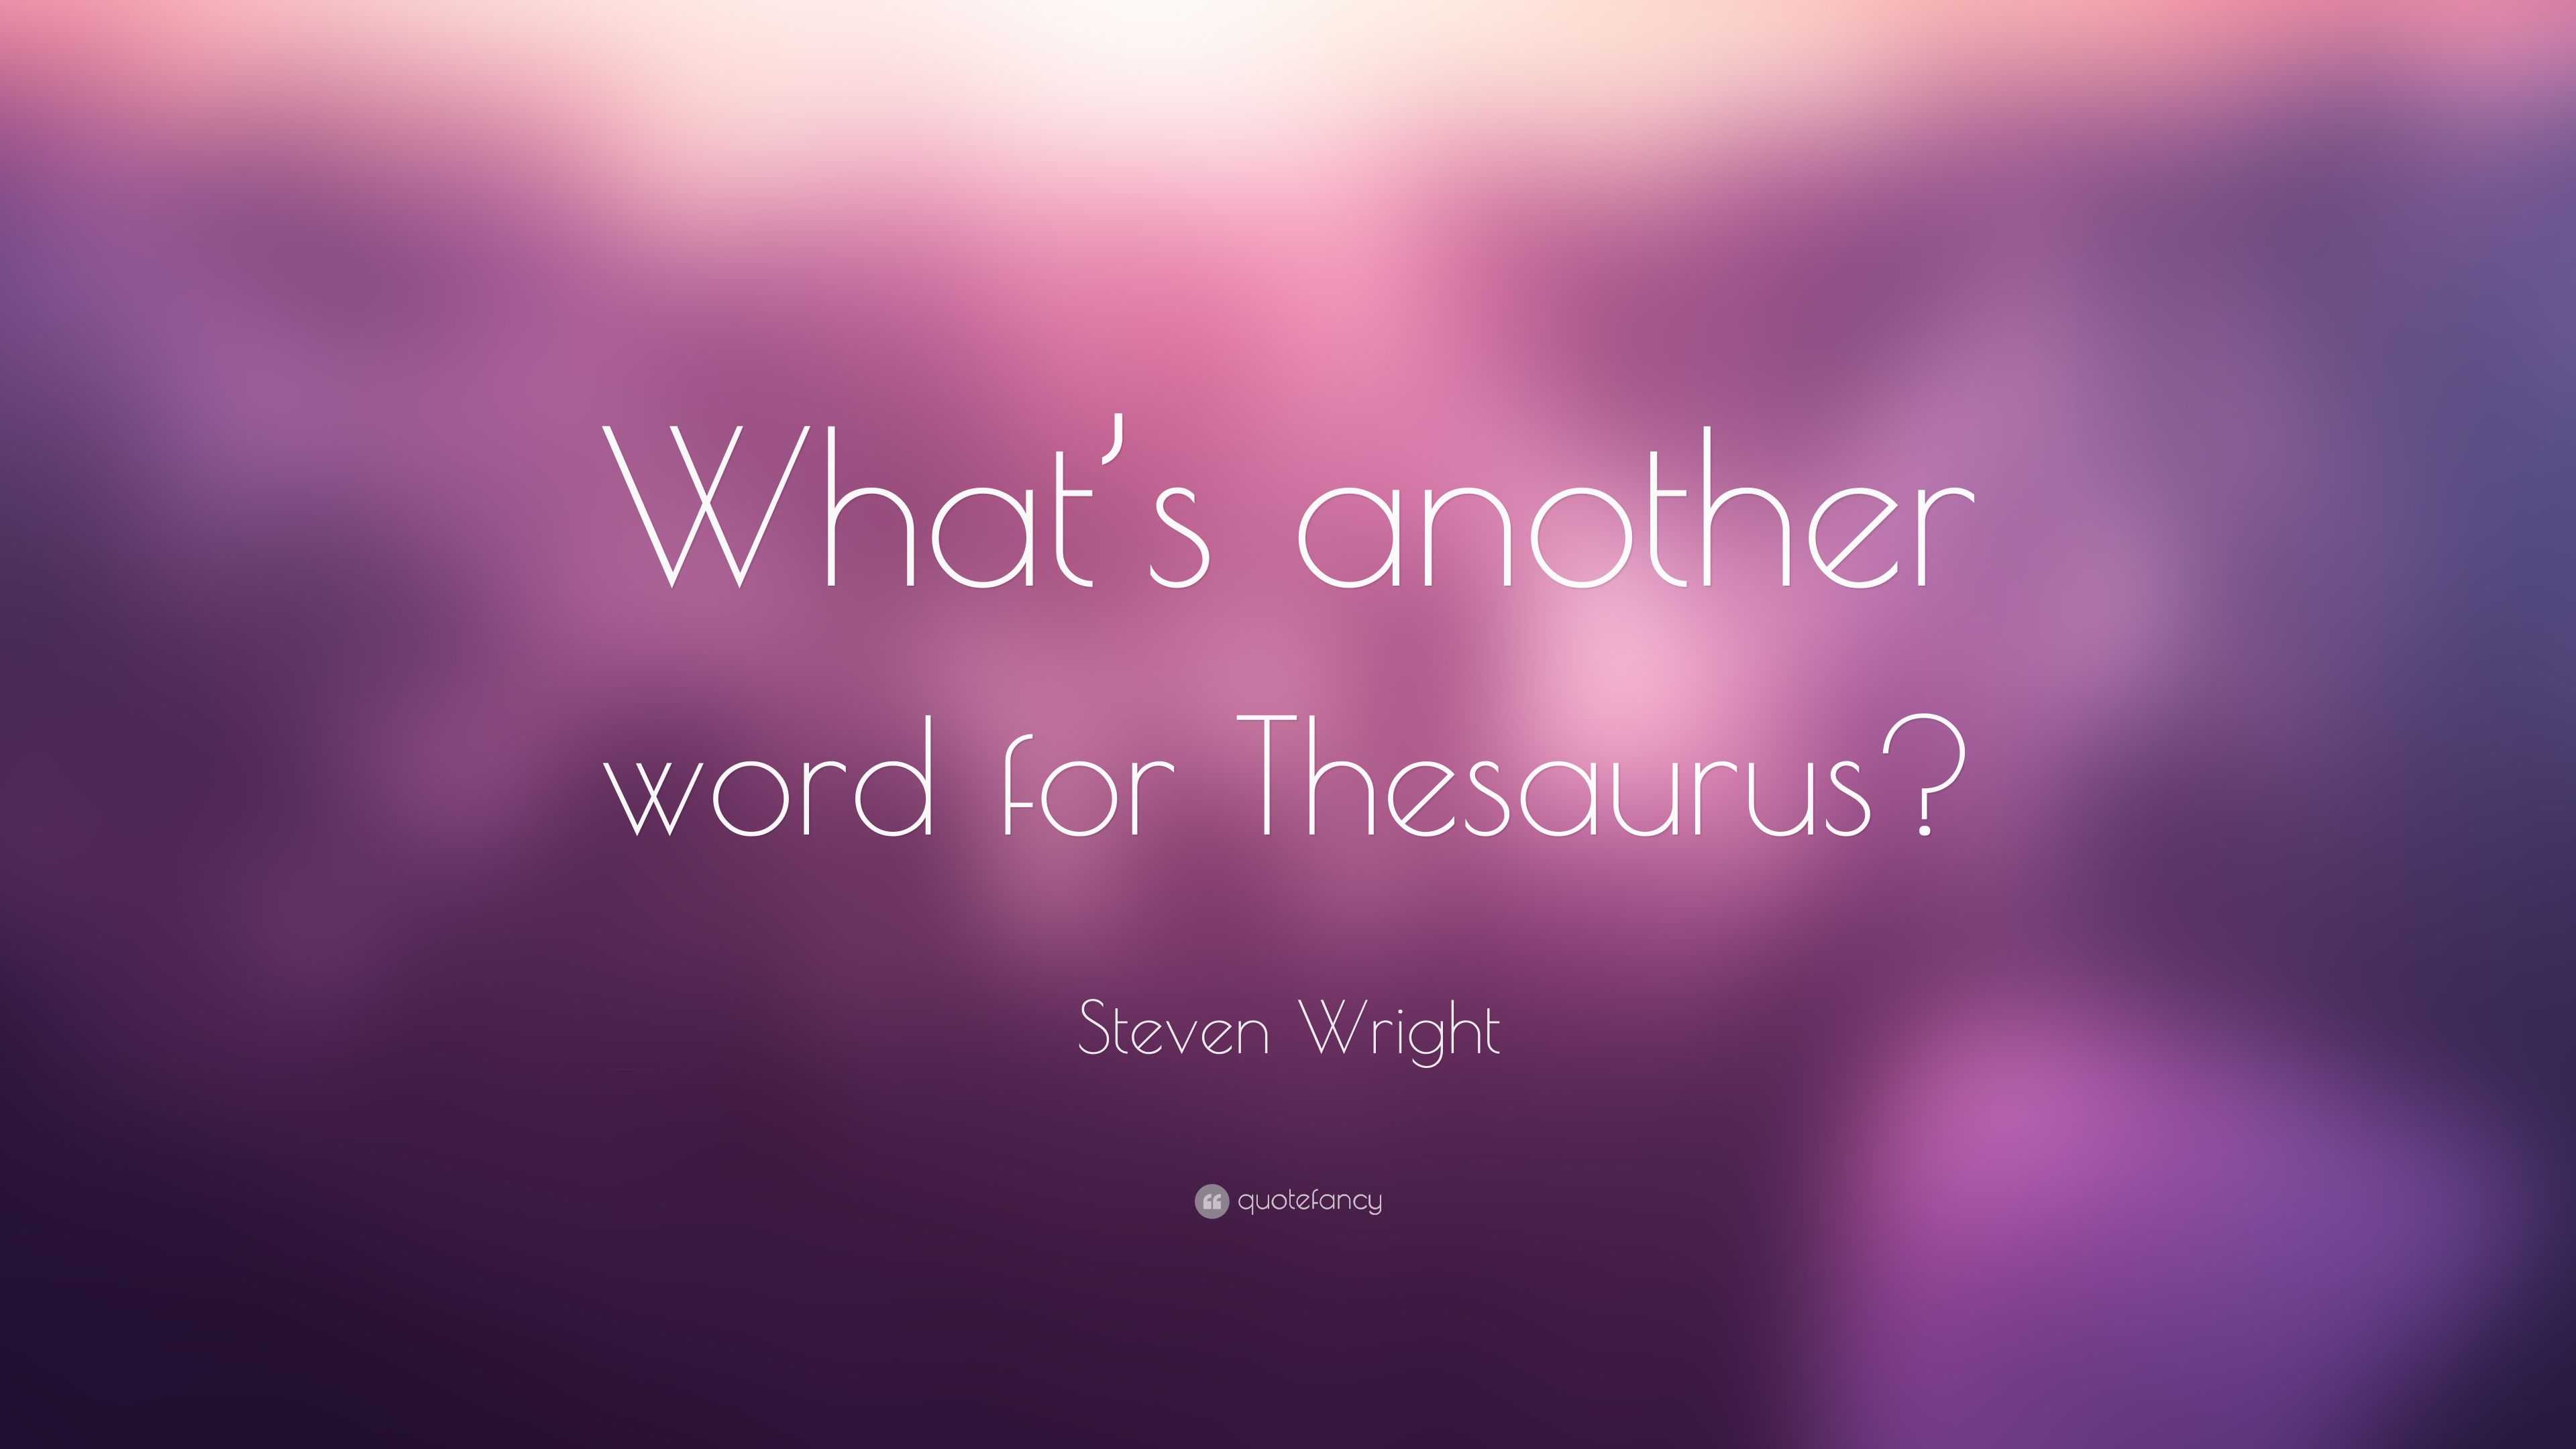 whats another word for thesaurus